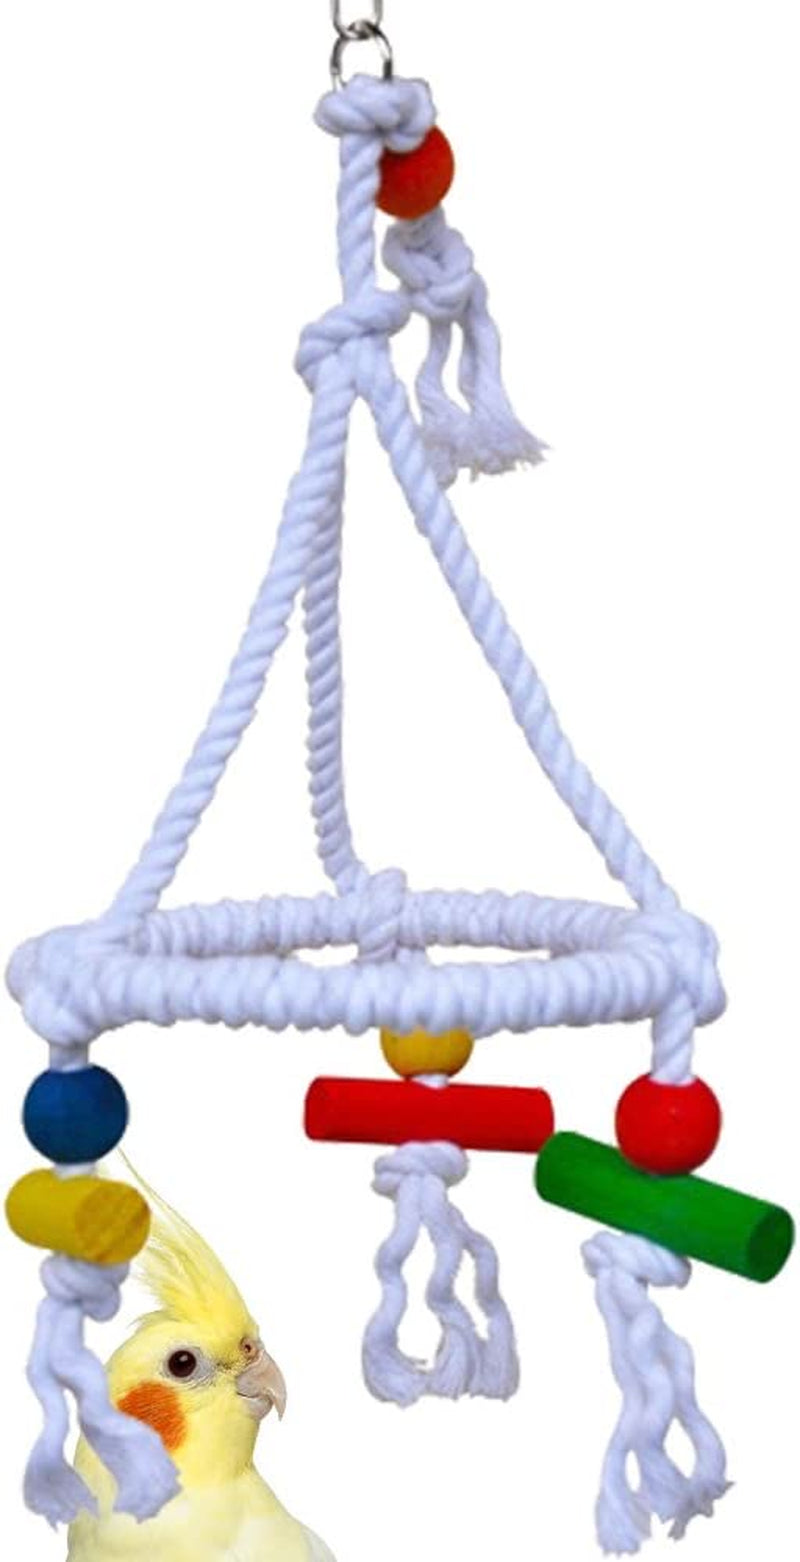 Bonka Bird Toys 1422 Rope Swing Pyramid Perch Toy Parrot Cage Perches Cages Parakeet Lovebird Conure Cockatiel Parakeets Swings Aviary Playground Ring Gym Supplies Animals & Pet Supplies > Pet Supplies > Bird Supplies Bonka Bird Toys   